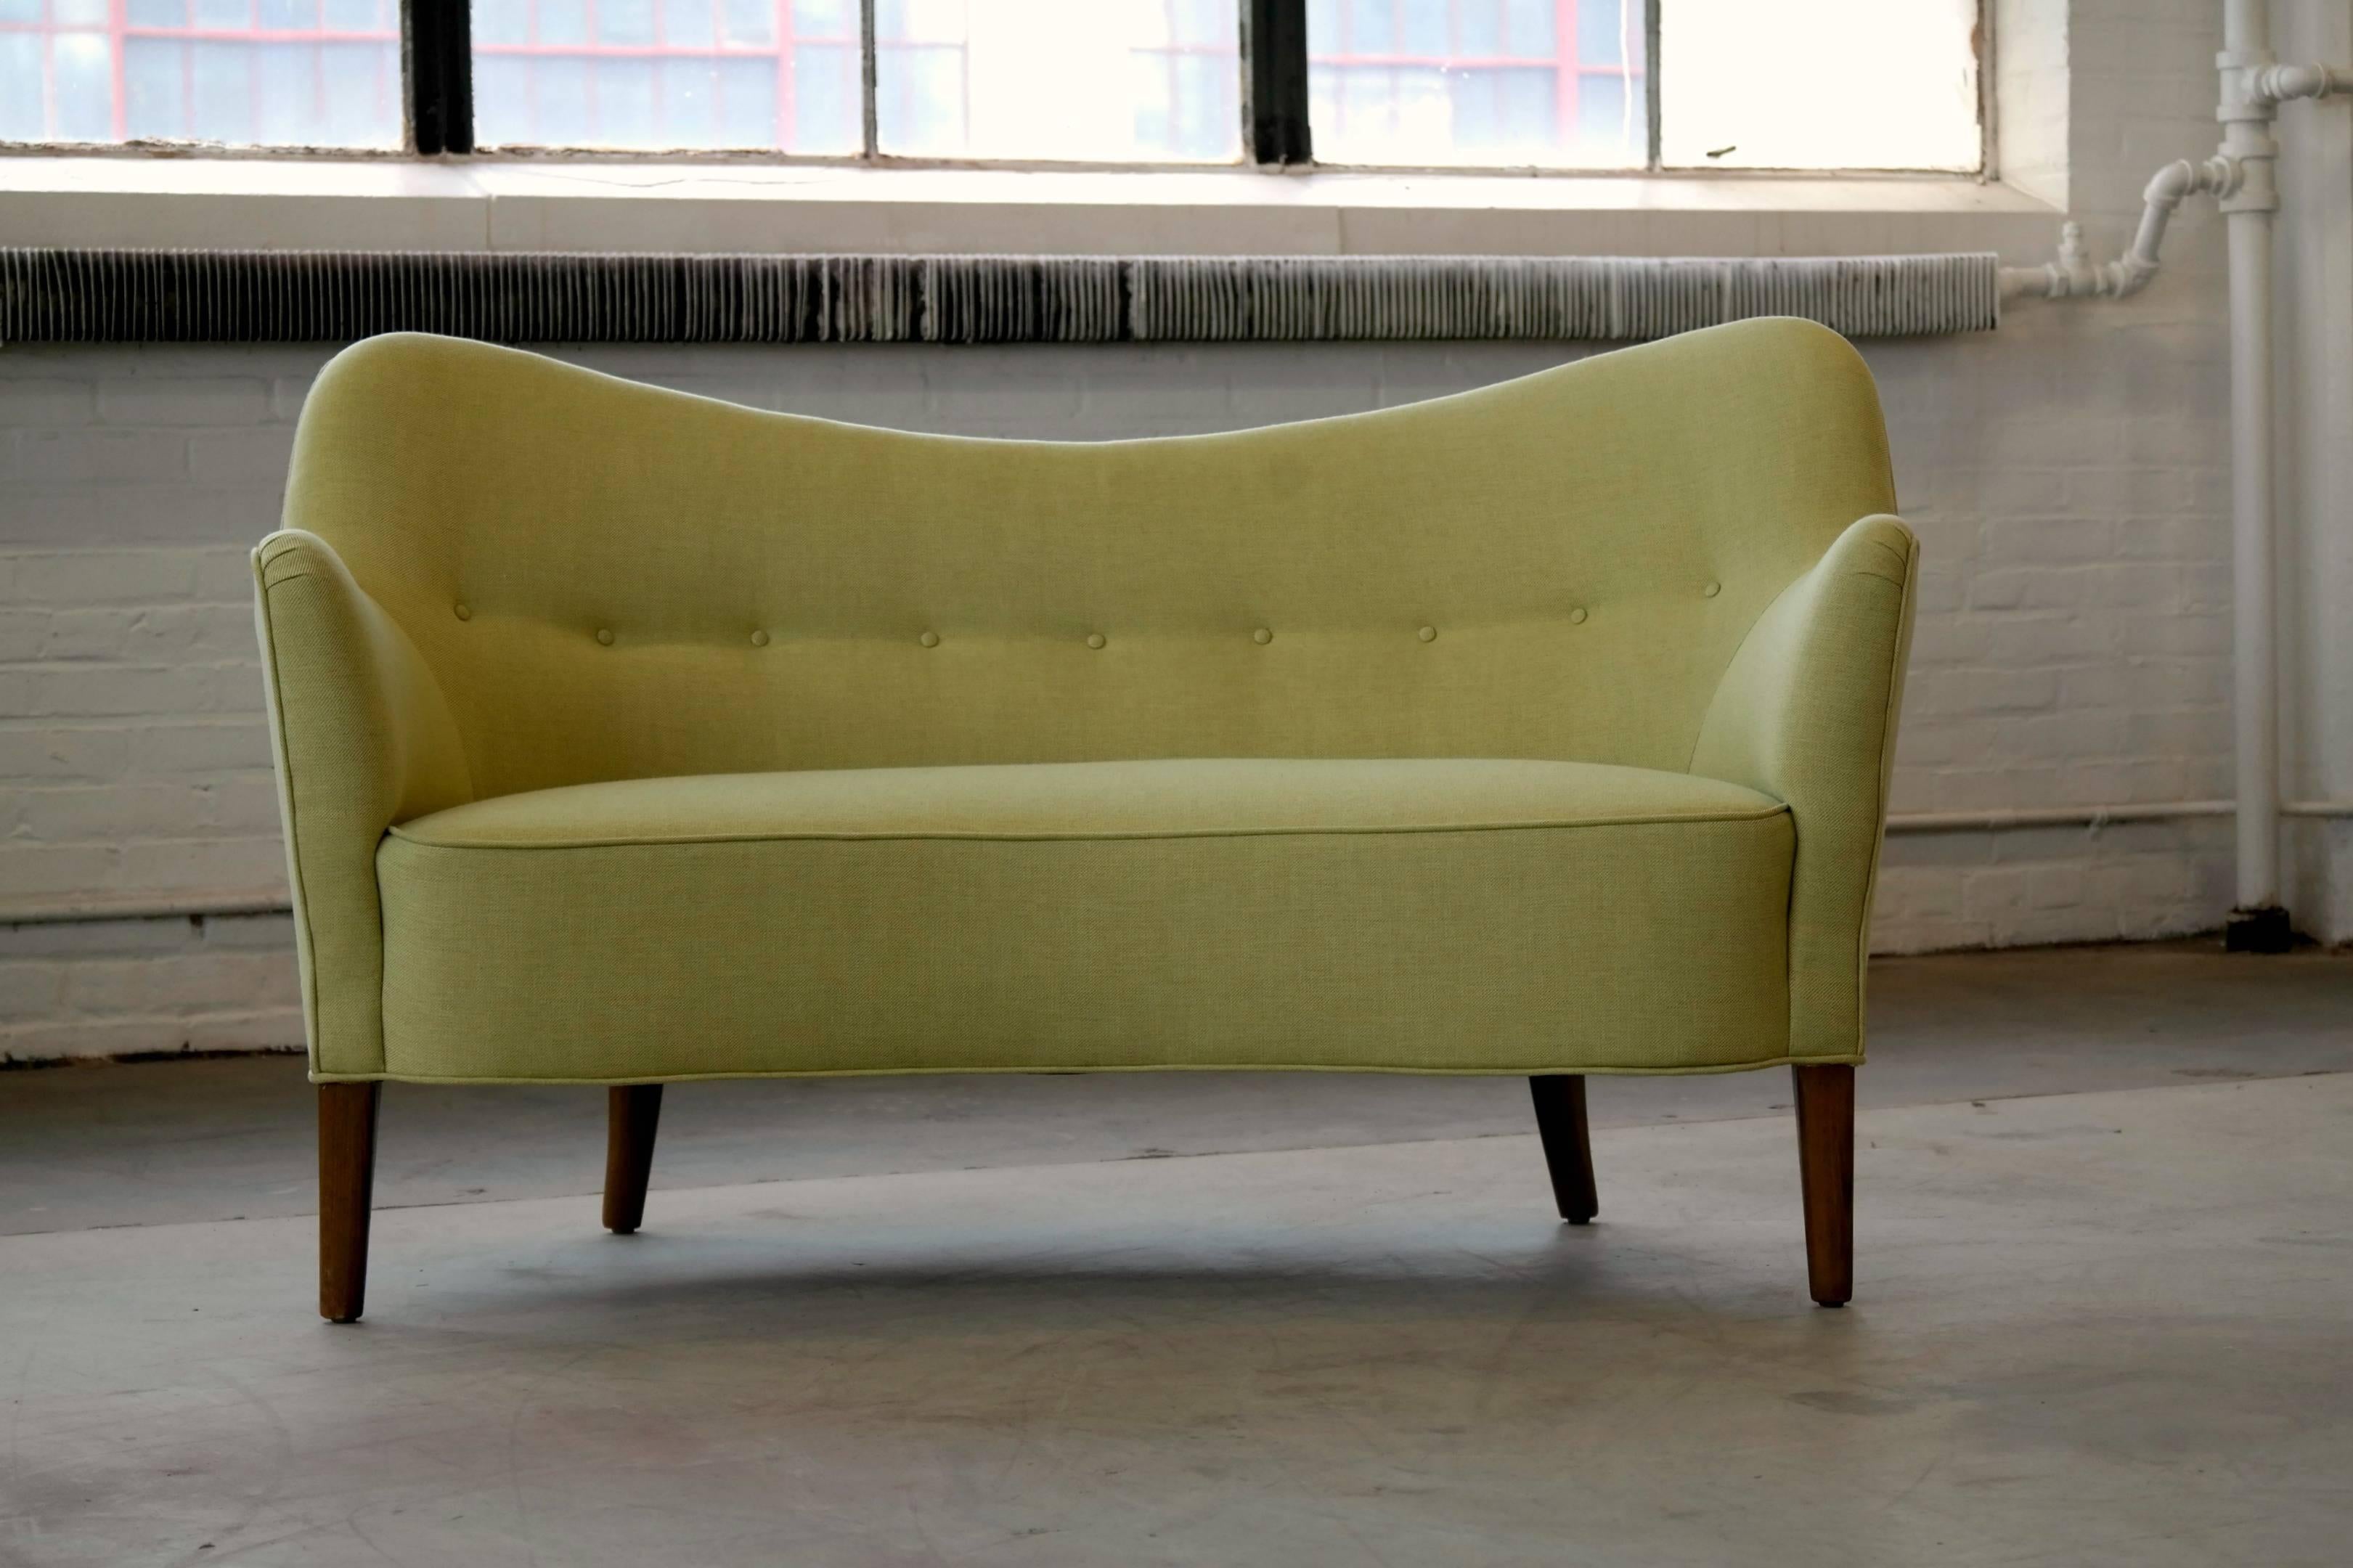 Superbly elegant Finn Juhl attributed petite sofa or settee model 185 made by Slagelse Mobelvaerk, Denmark. The lines and proportions of this design are just perfection. While rare this sofa is often sold as a Finn Juhl model BO-55 designed by Juhl